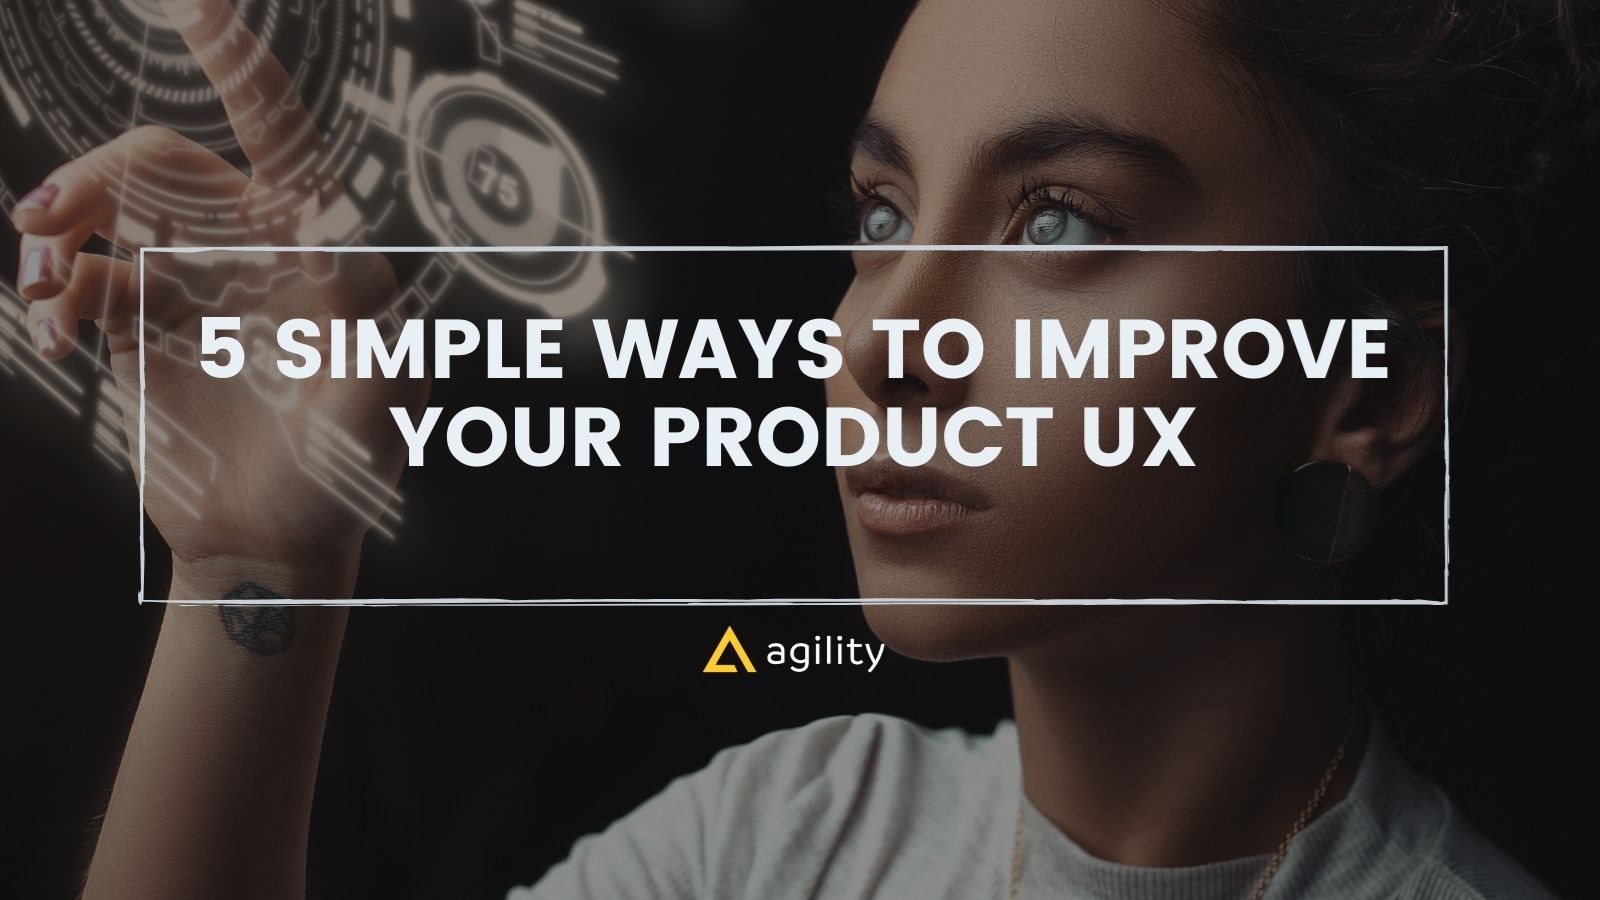  Improve Your Product UX on agilitycms.com